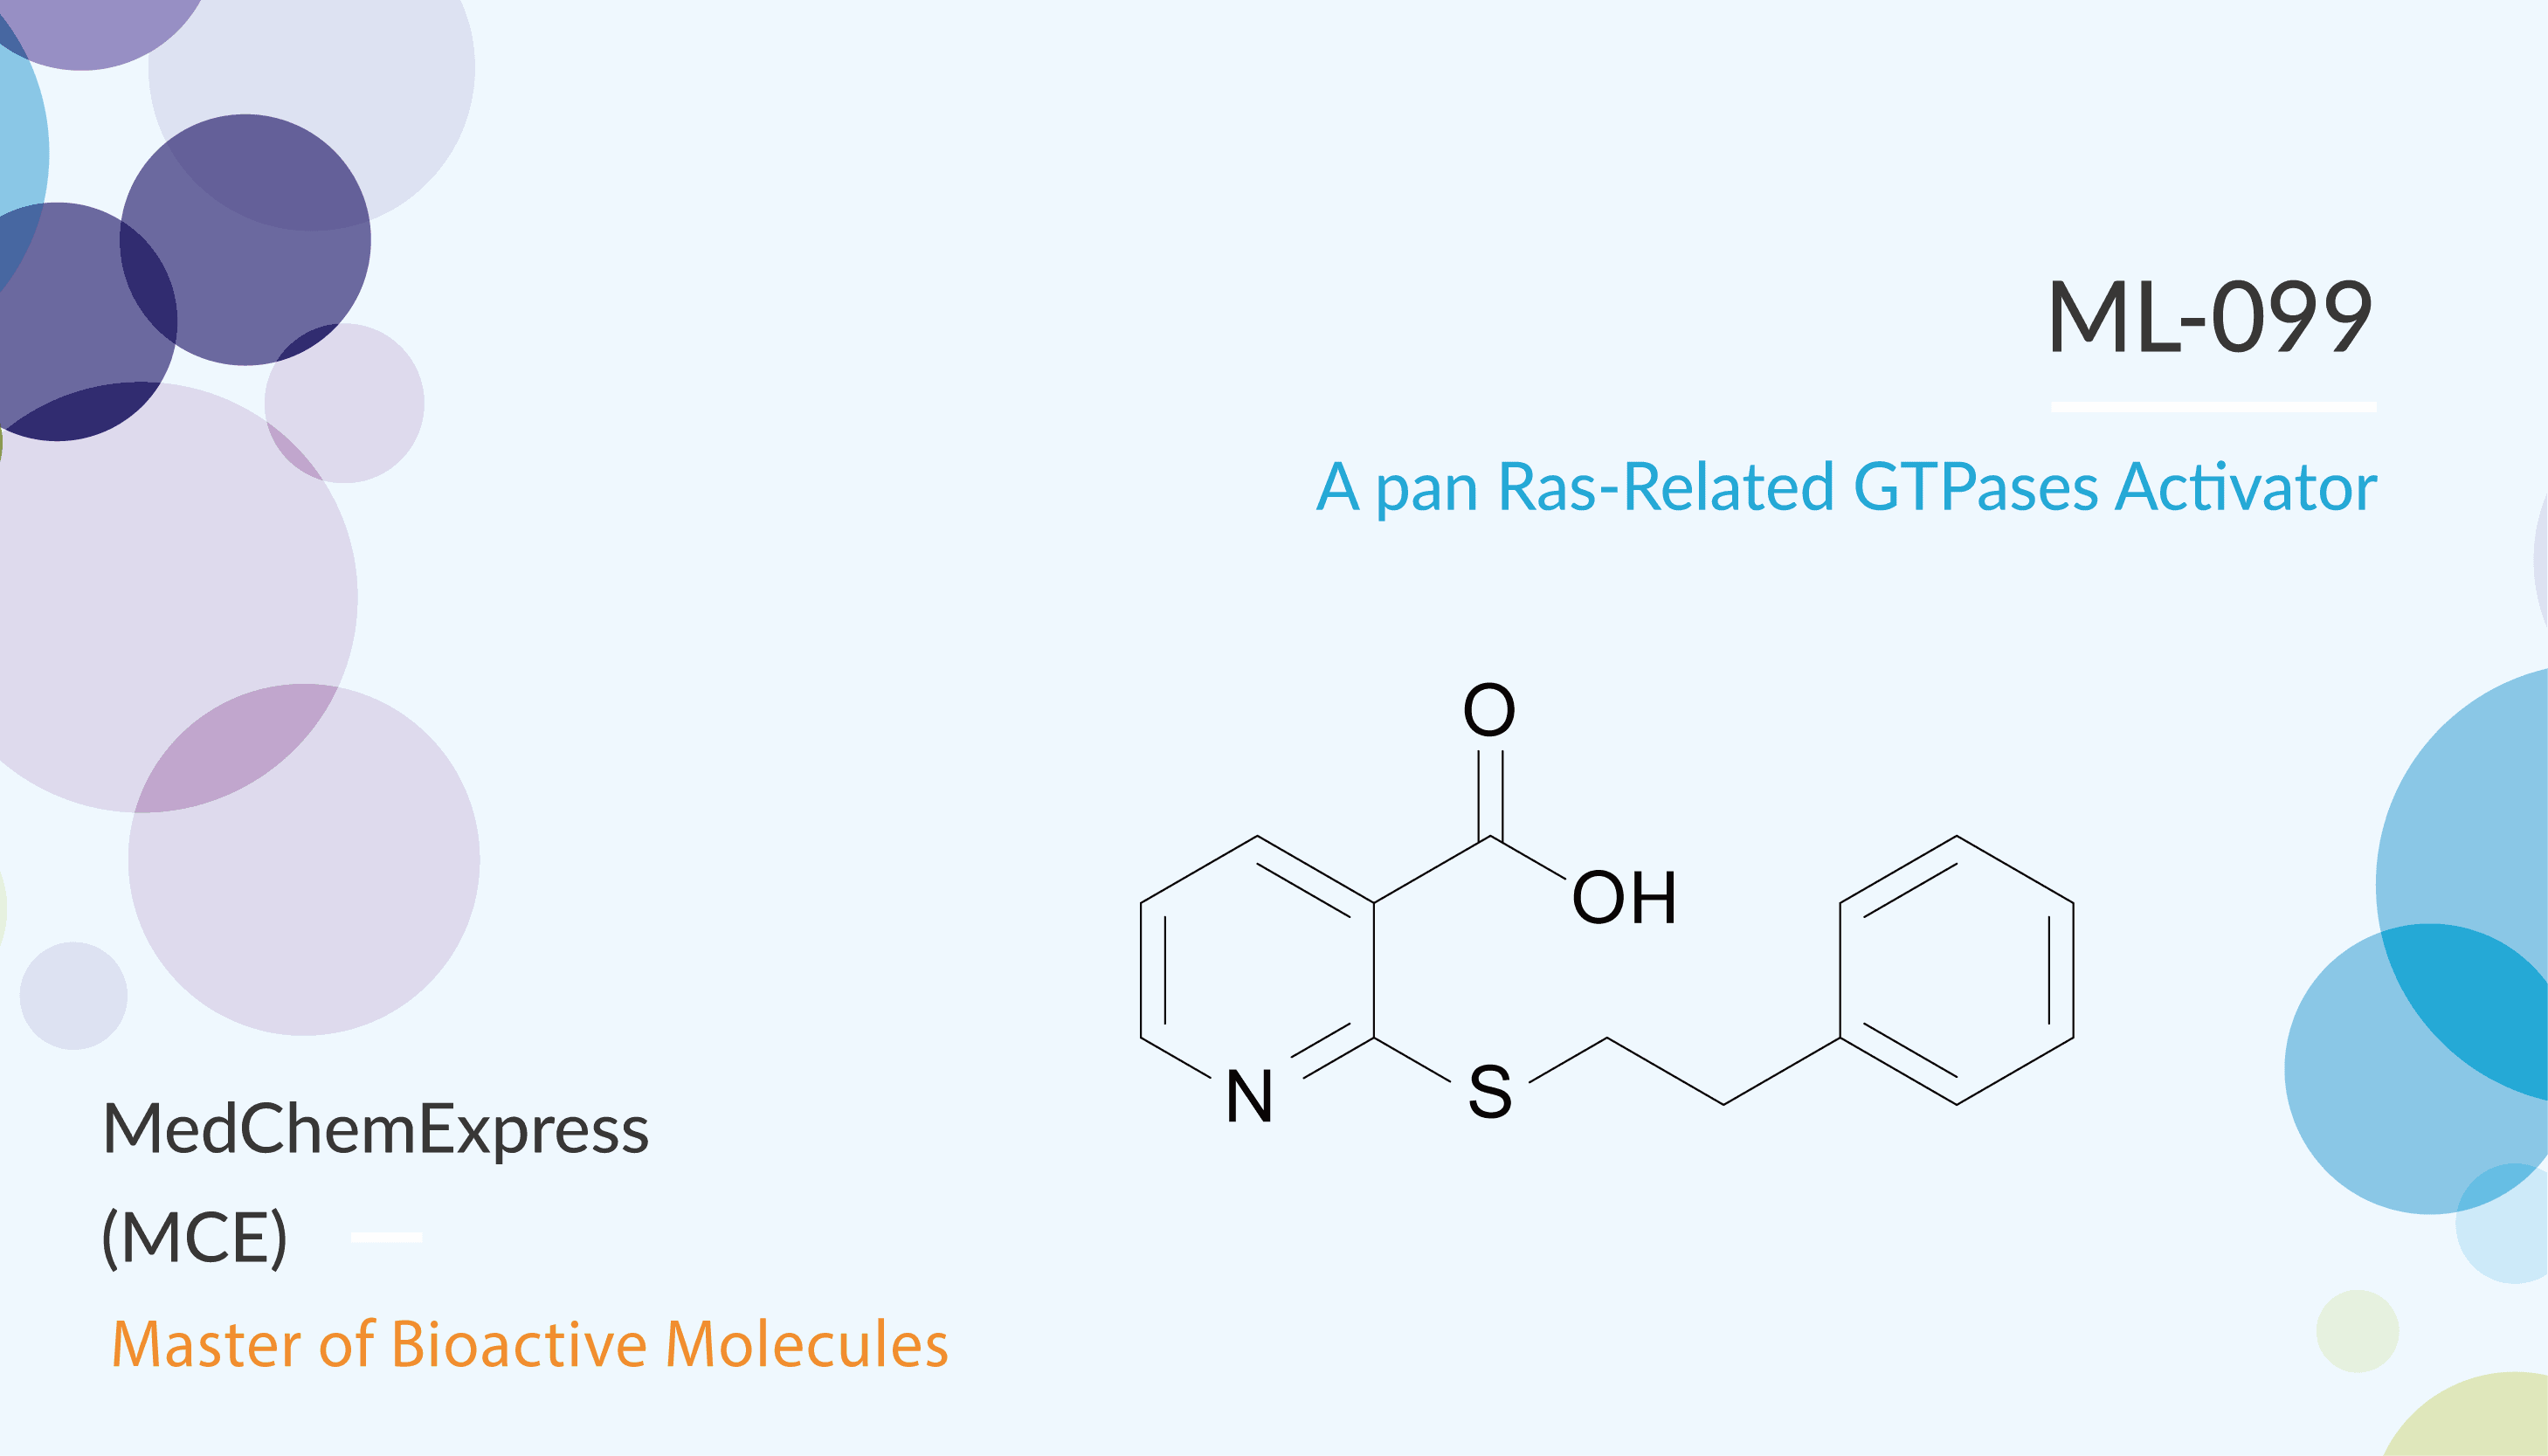 ML-099 is a pan Ras-Related GTPases Activator